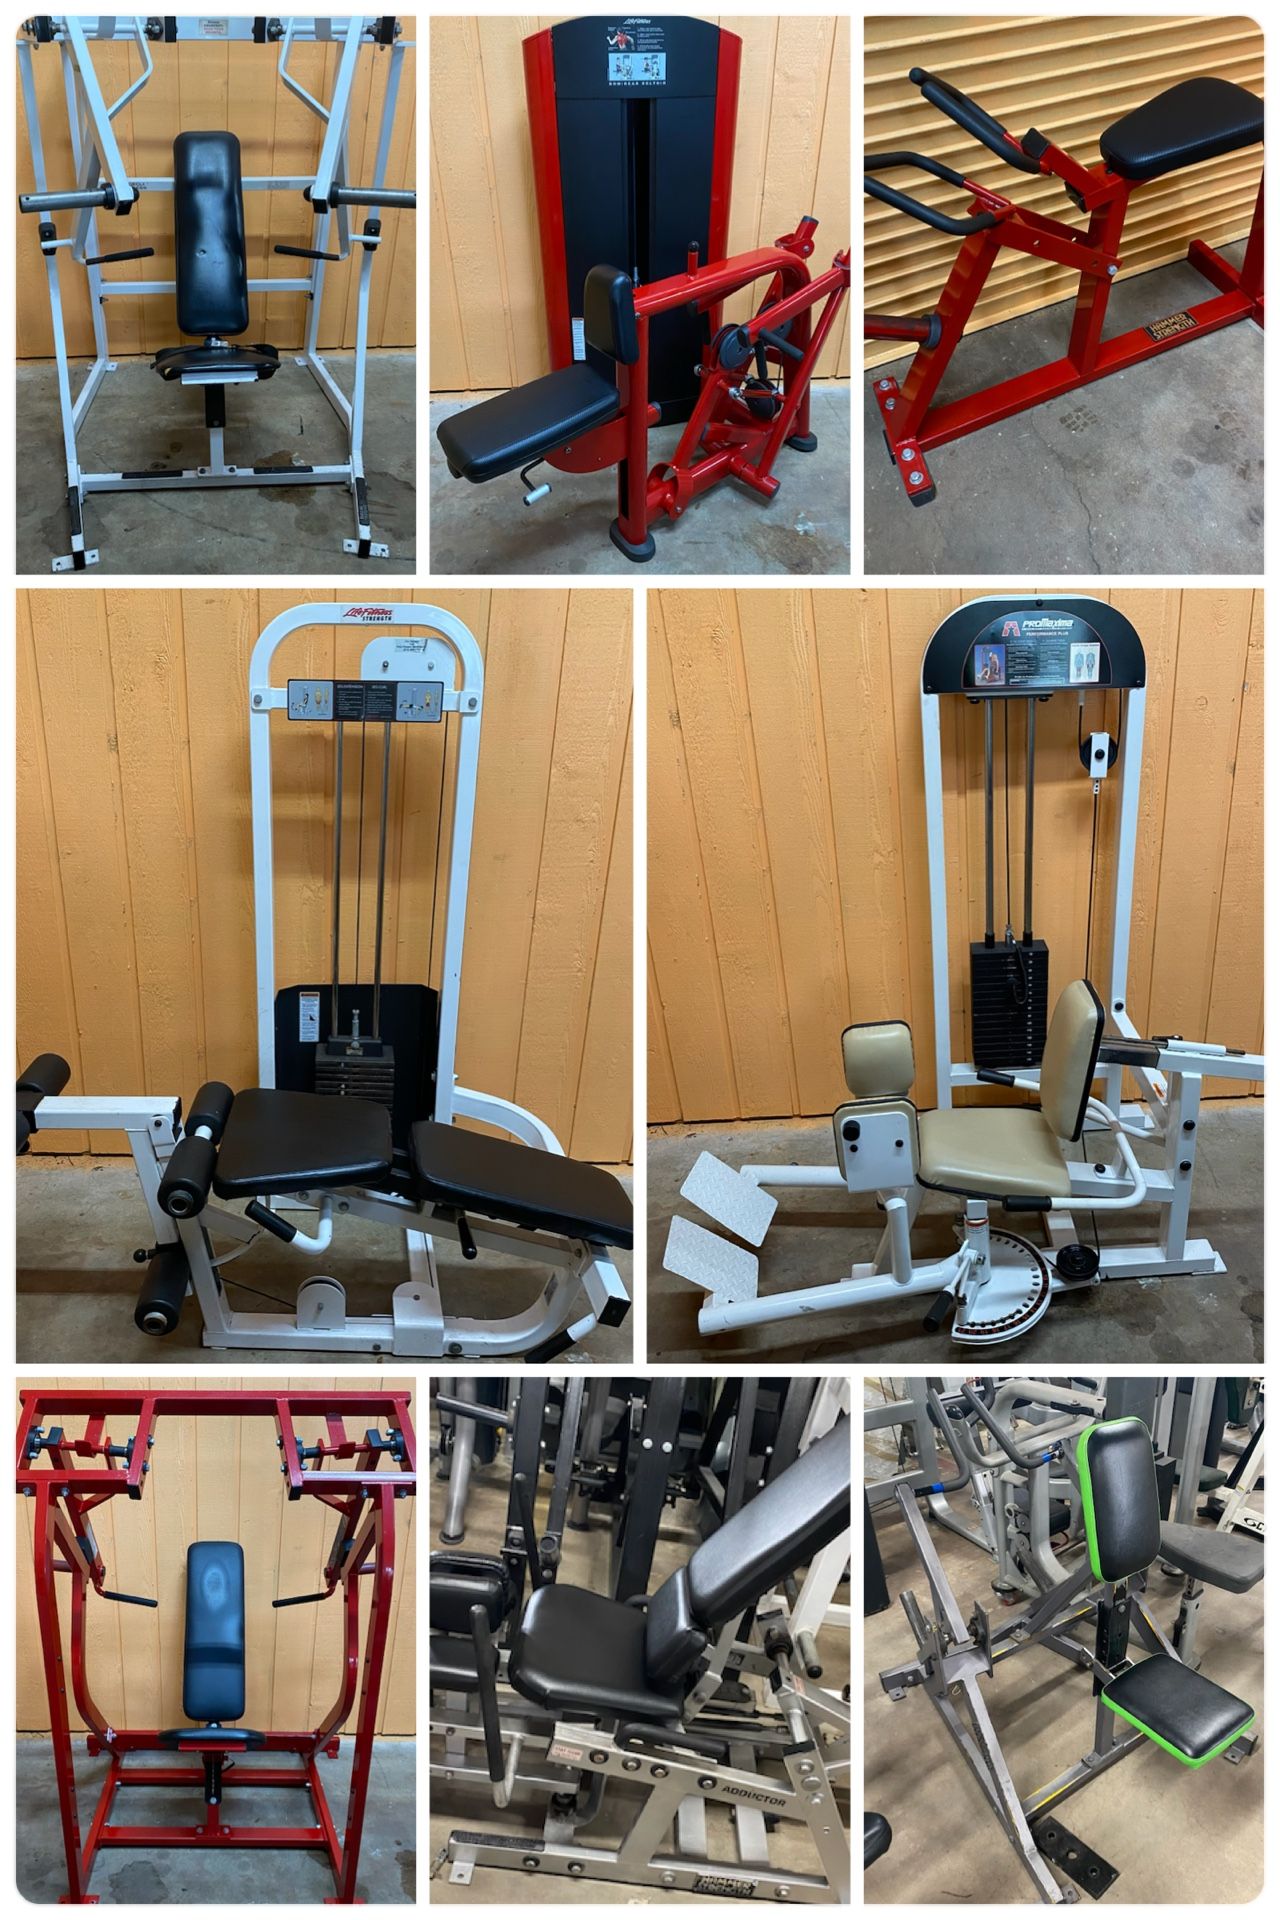 Gym Equipment, Olympic Weight Plate Bench, Chest, Smith Machines Home Leg Press Dumbbell Rack Power Squat Curl Extension Bar 